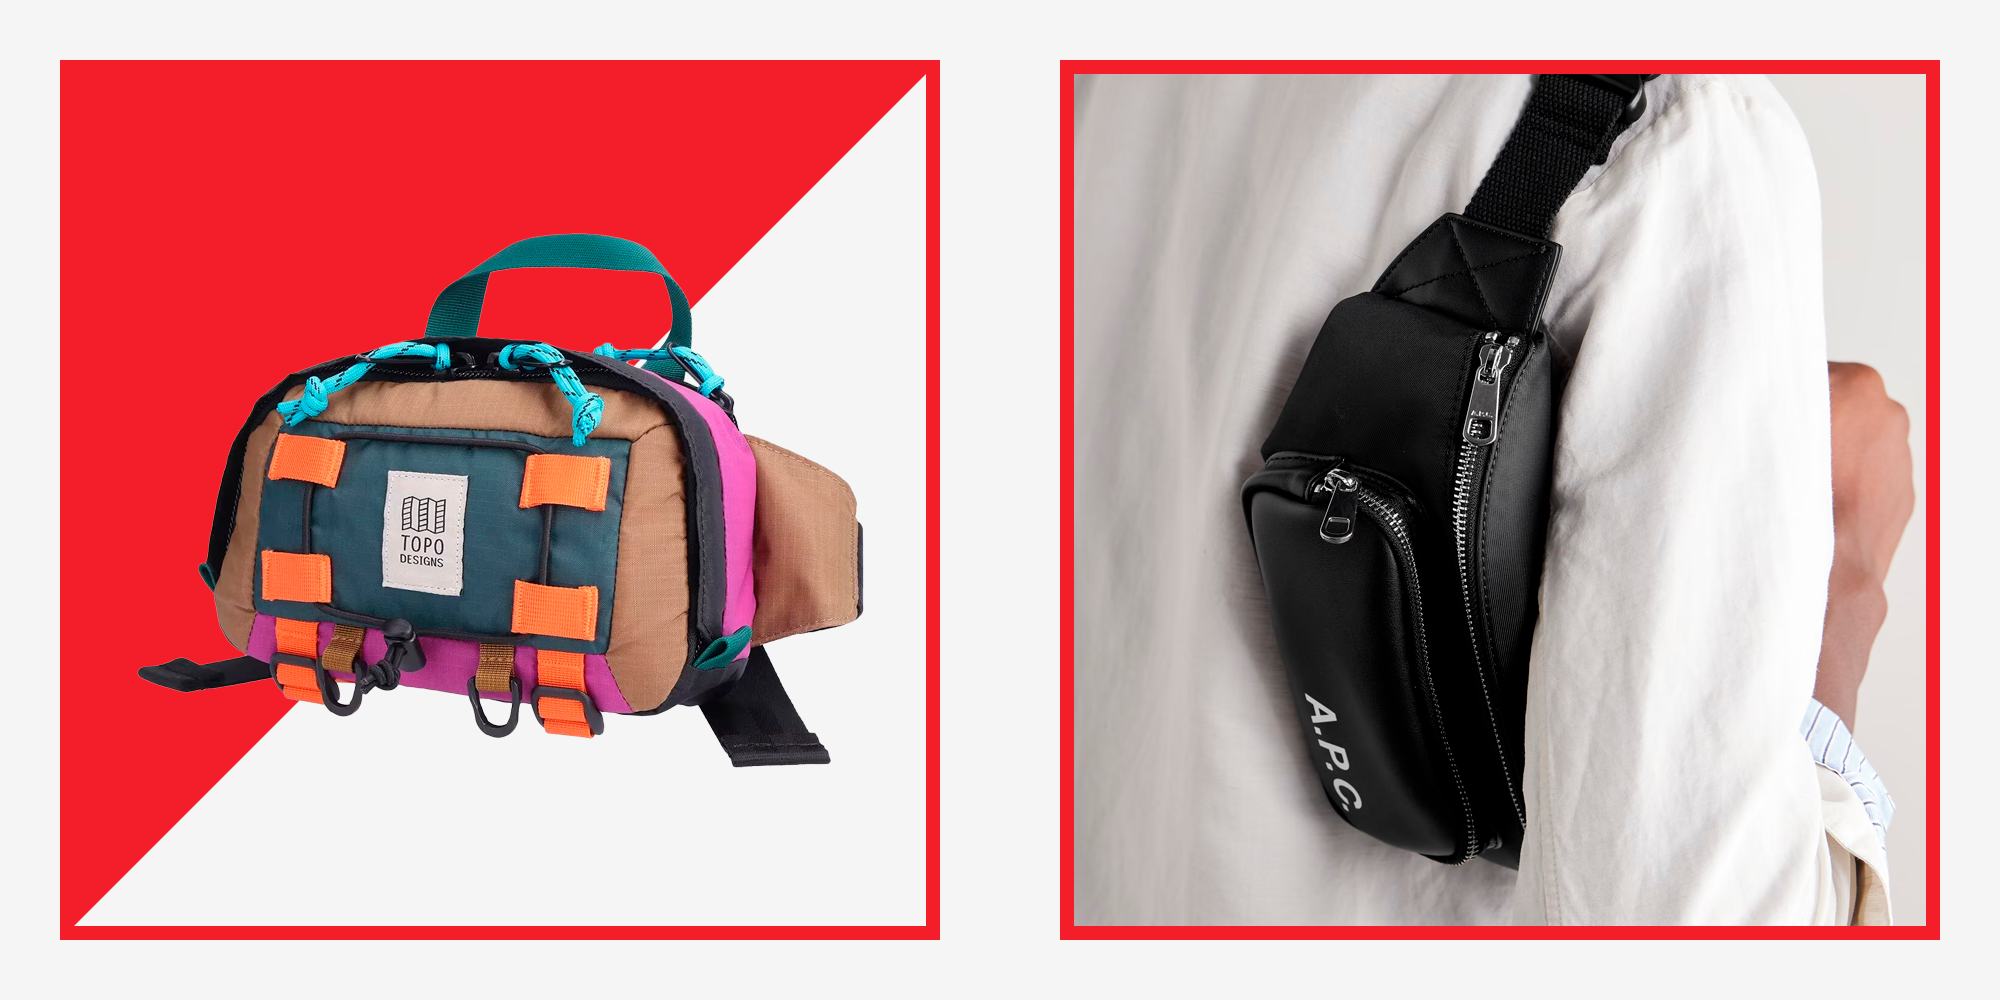 The 25 best belt bags and fanny packs of 2023